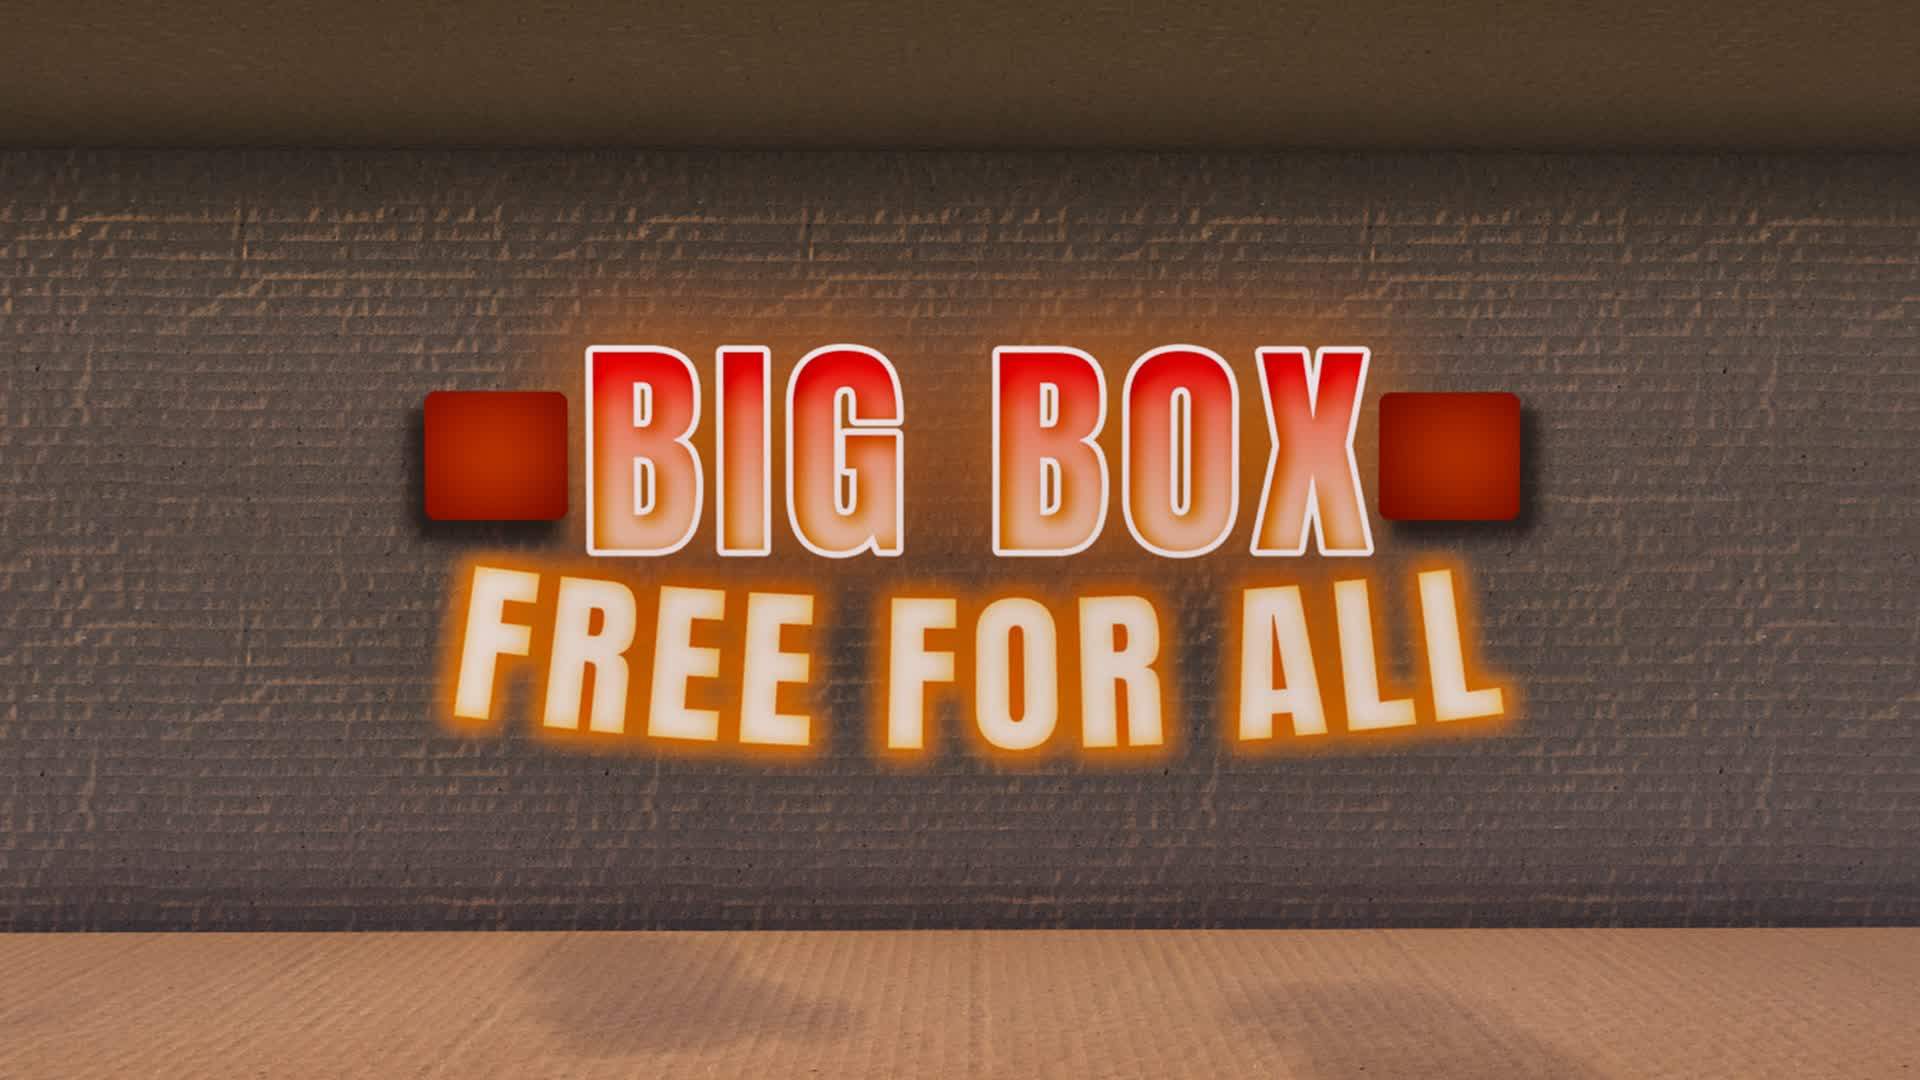 BIG BOX - FREE FOR ALL